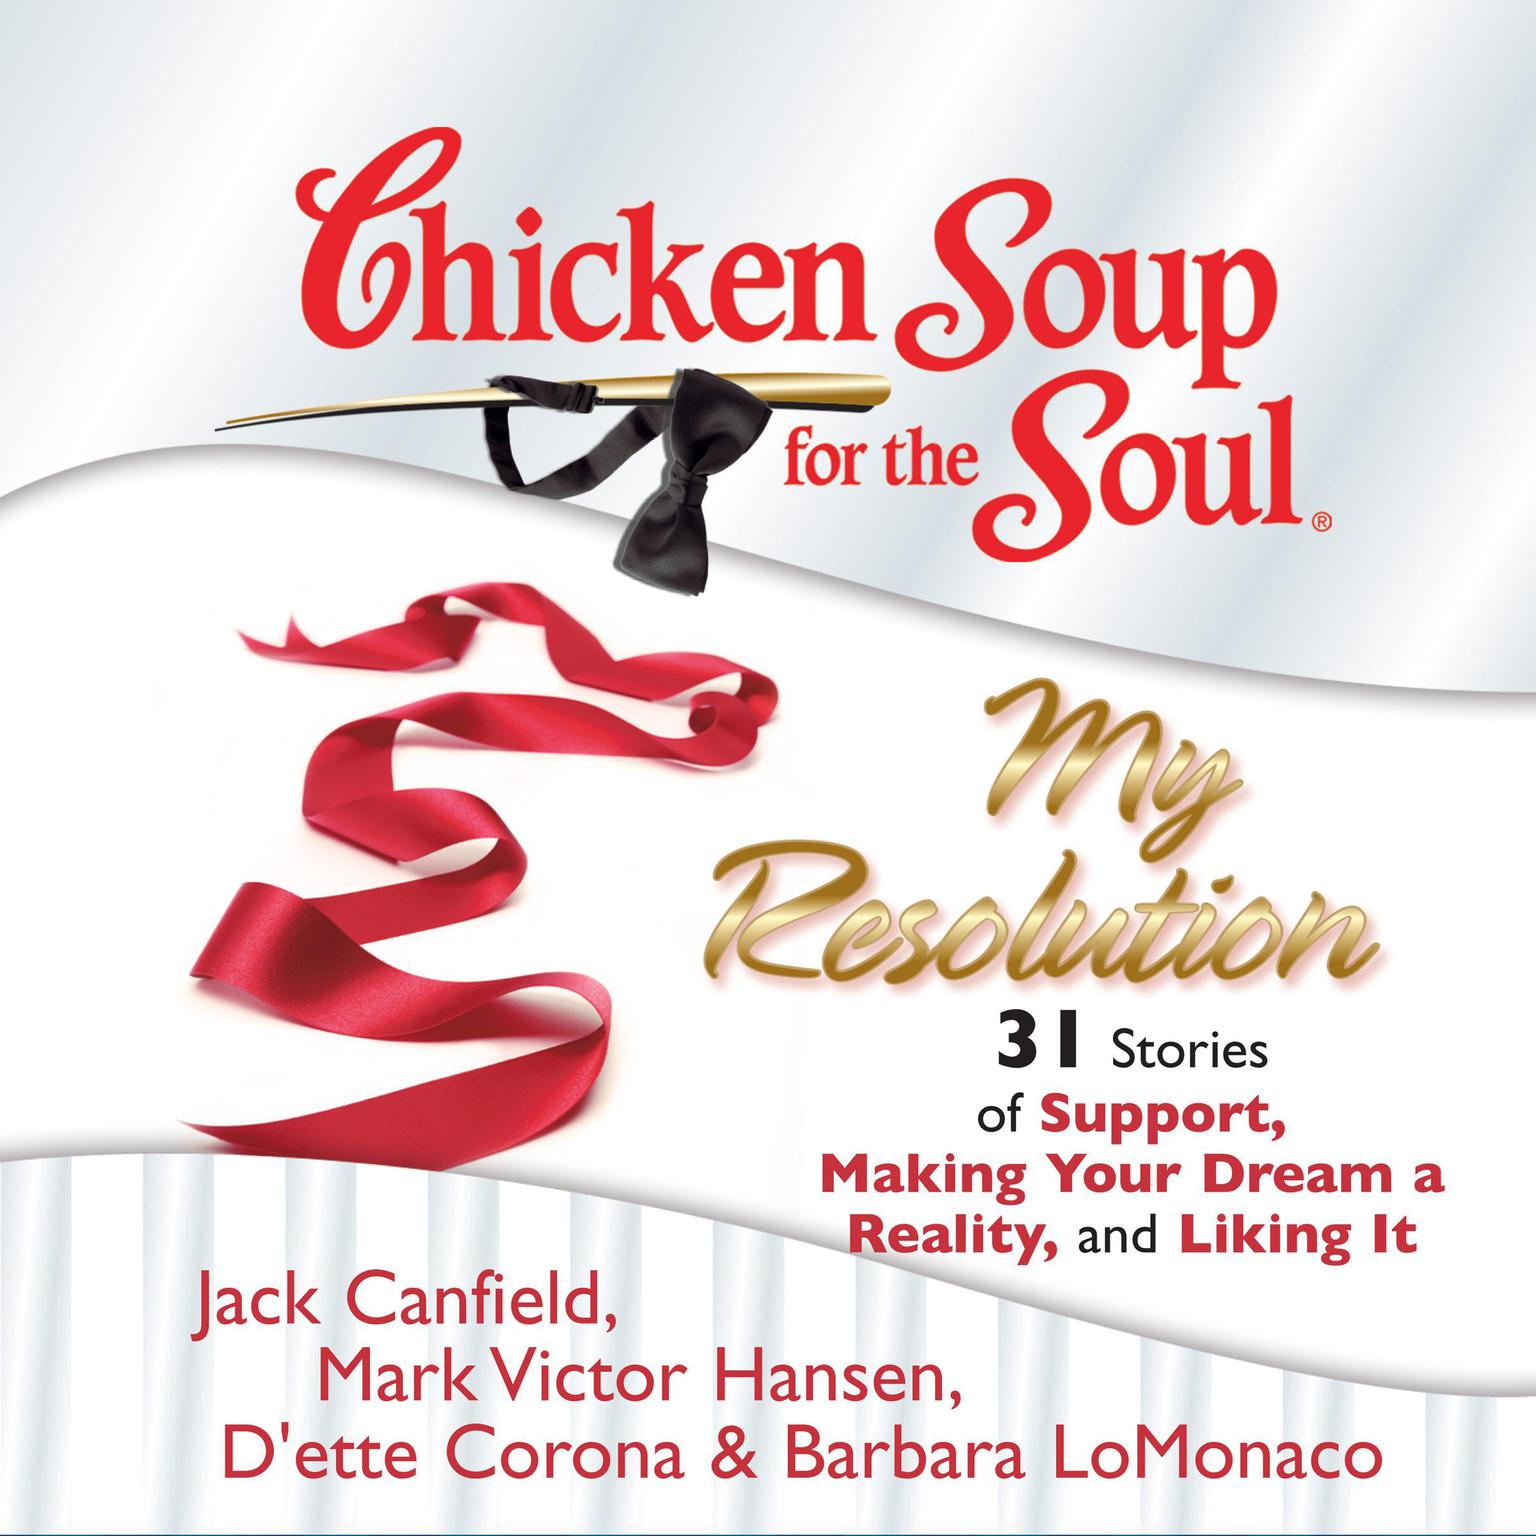 Chicken Soup for the Soul: My Resolution - 31 Stories of Support, Making Your Dream a Reality, and Liking It Audiobook, by Jack Canfield